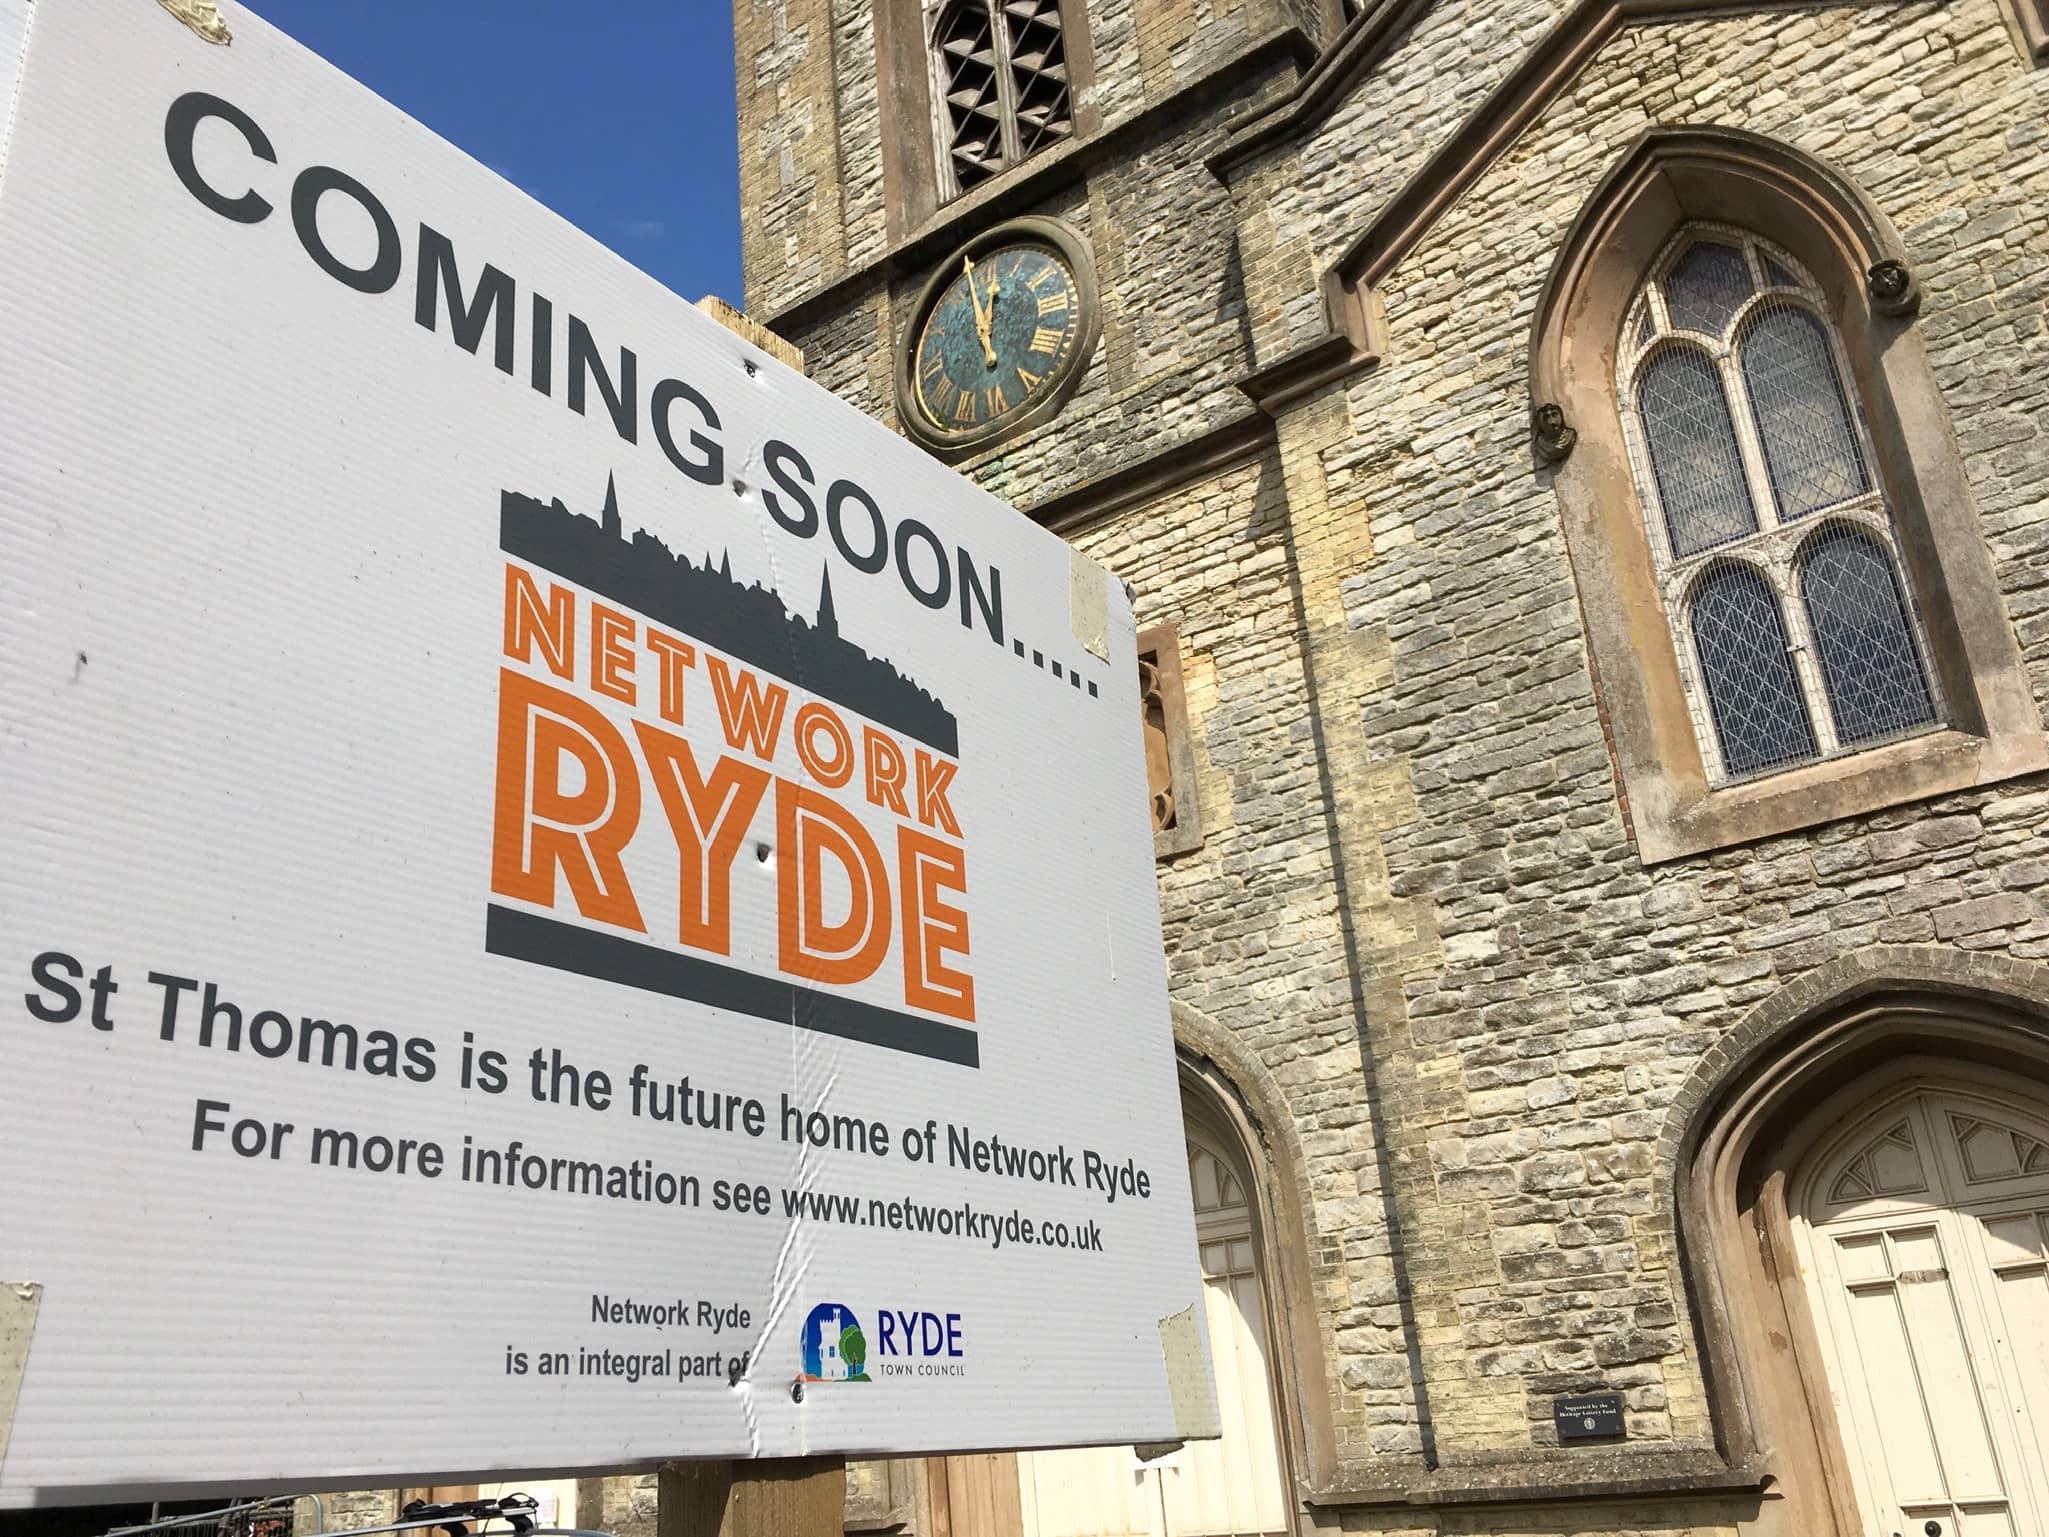 St Thomas's Ryde - Coming Soon sign outside the building